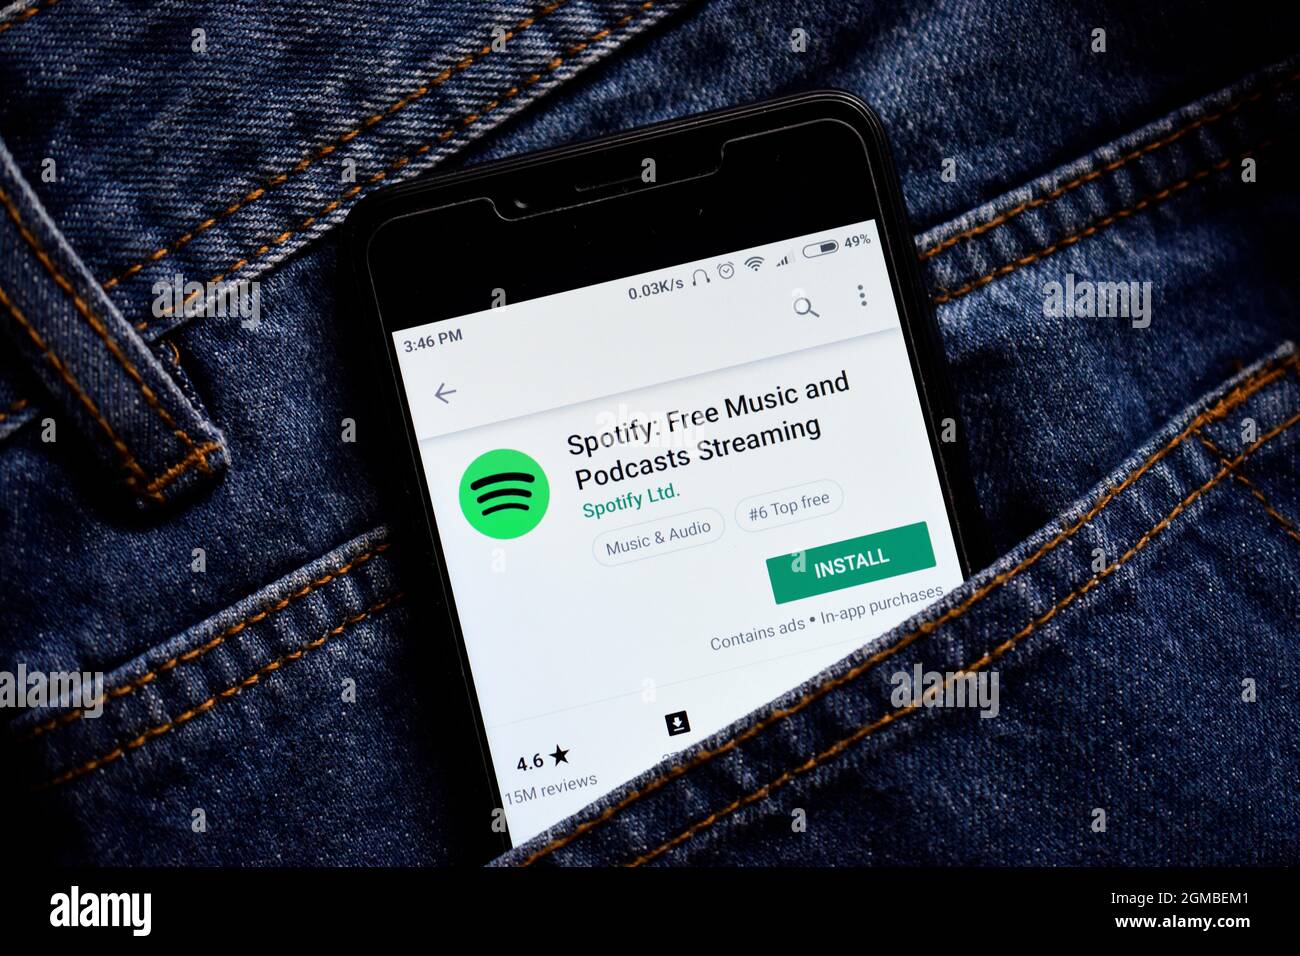 Delhi, india, May 13, 2019: spotify music application, spofity app in play store Stock Photo